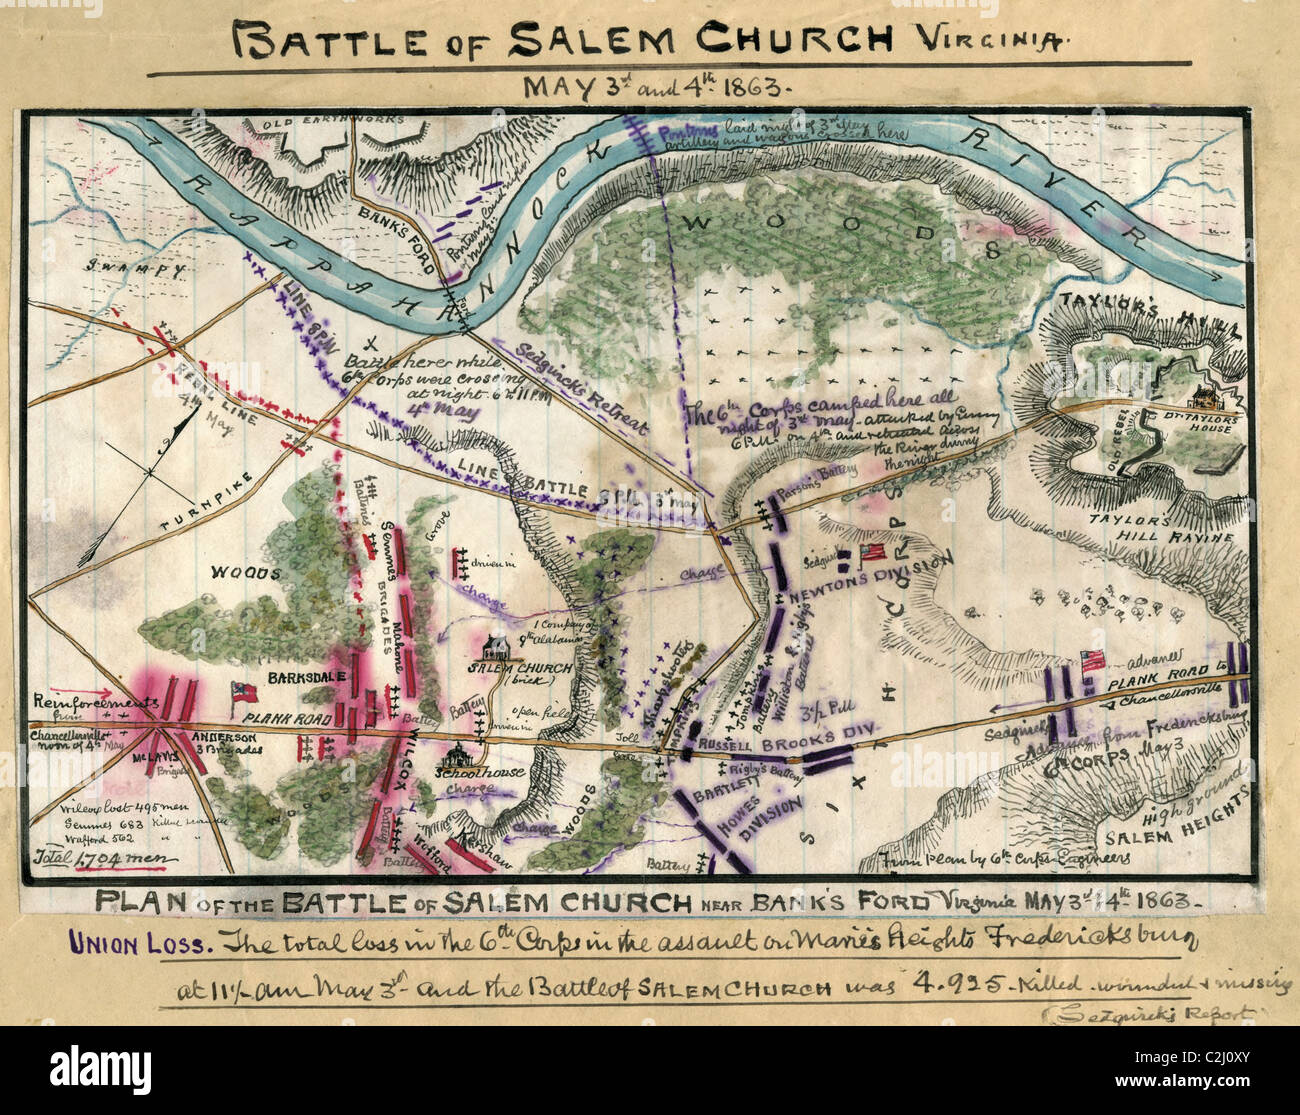 Battle of Salem Church near Bank's Ford, Virginia : May 3rd & 4th 1863. Stock Photo